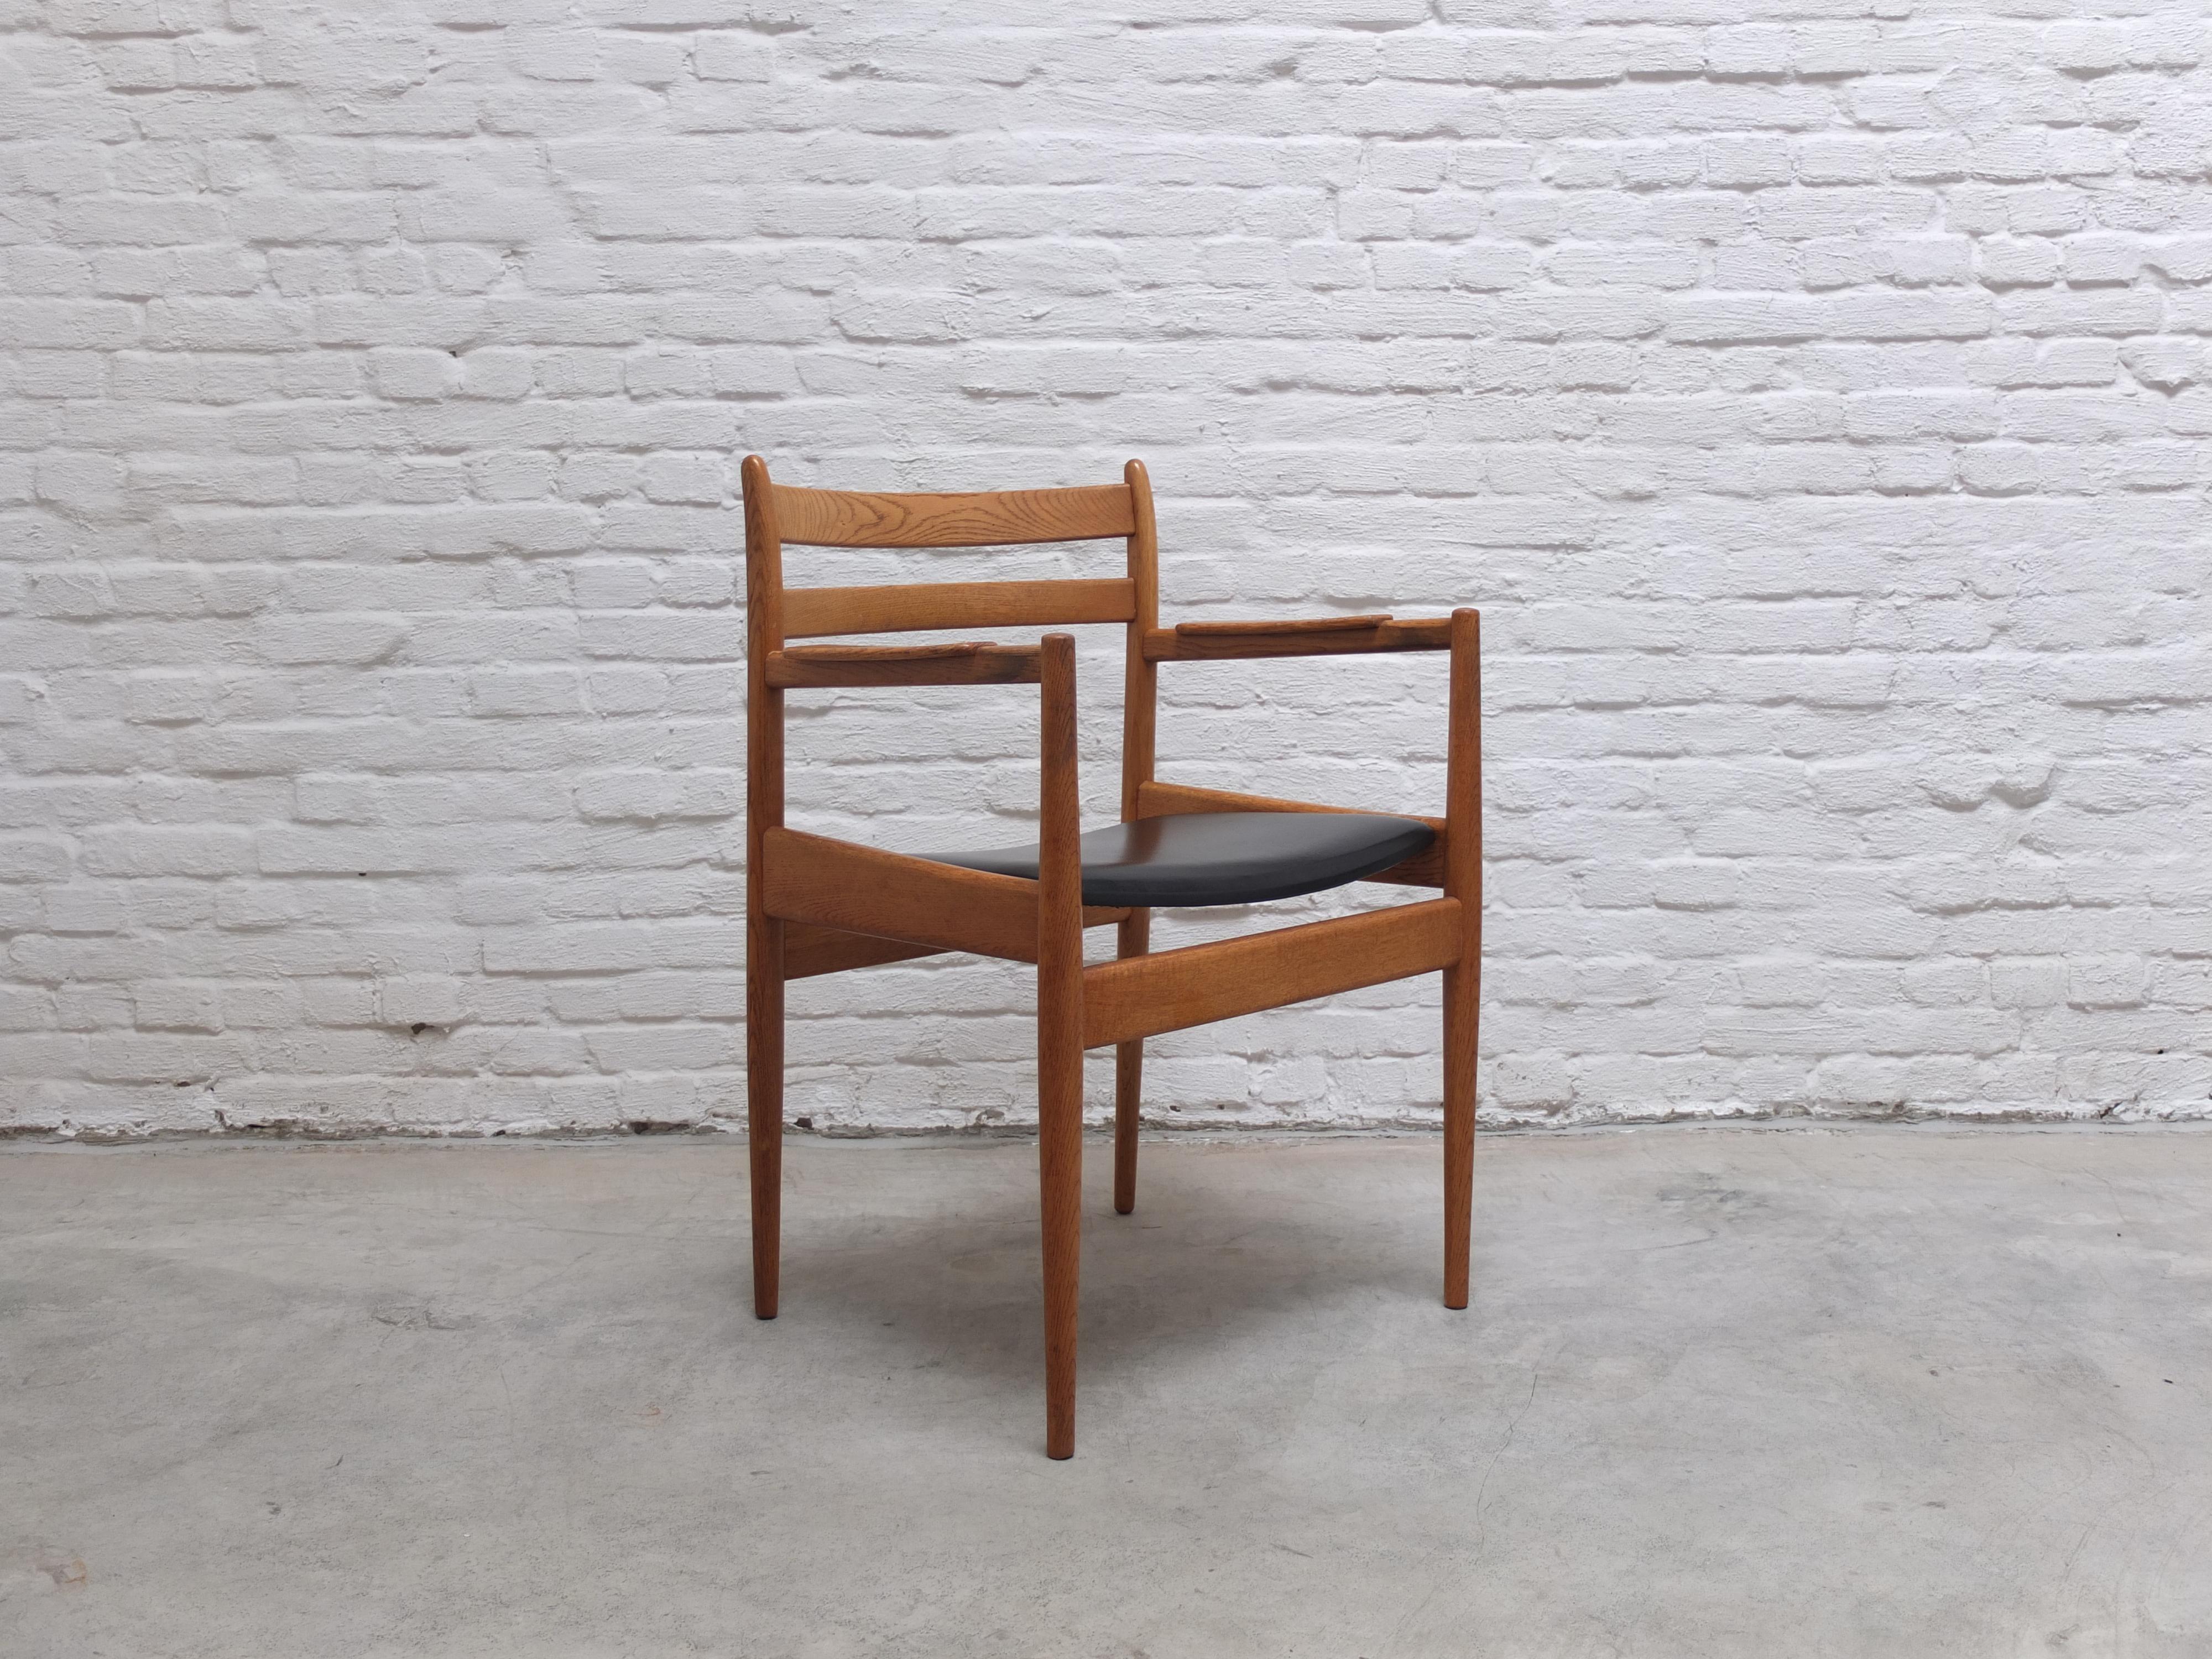 A rare armchair or desk chair in solid oak from the ‘Abtracta’ series designed by Jos De Mey for Van Den Berghe-Pauvers during the 1960s. This chair belonged to a desk which is also available for sale. Labeled by the maker and in very good original